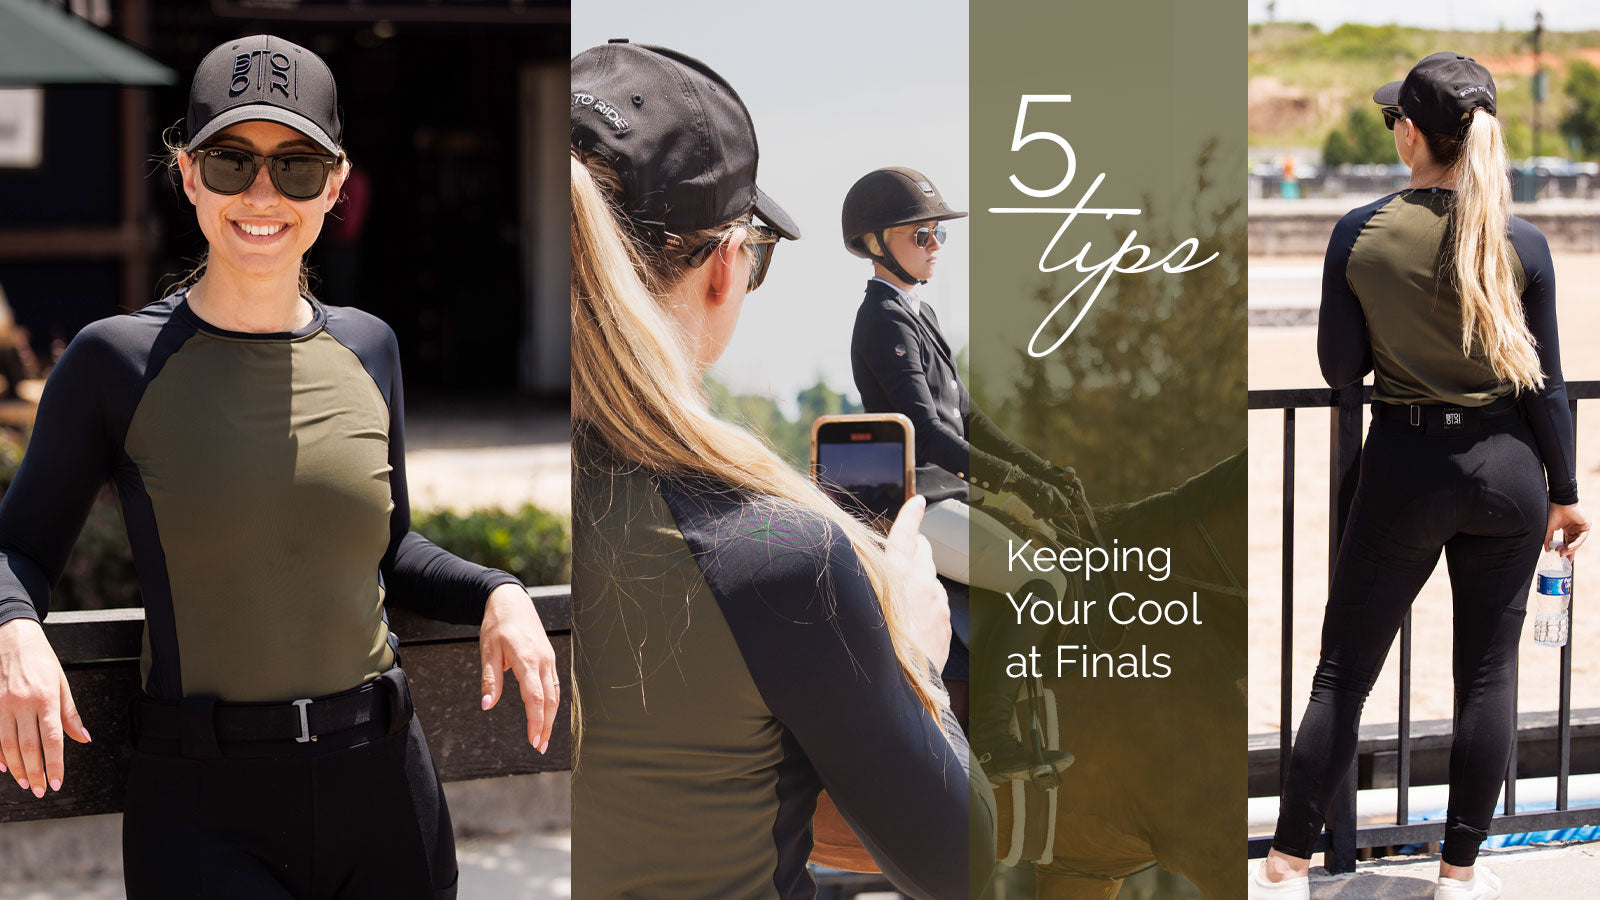 5 Tips for Keeping Your Cool at Finals